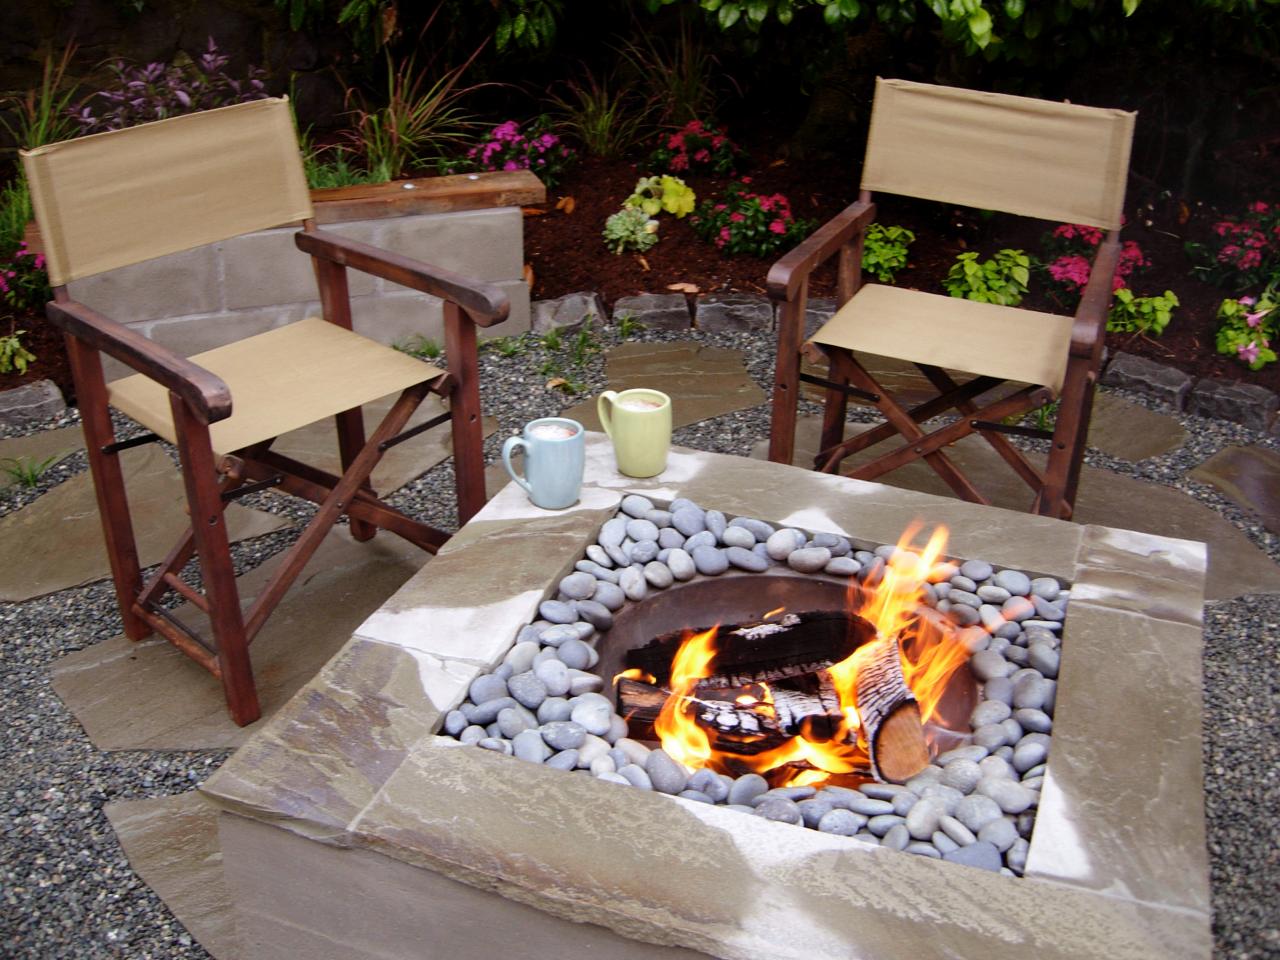 How To Make A Concrete Fire Feature, Build Your Own Lp Fire Pit